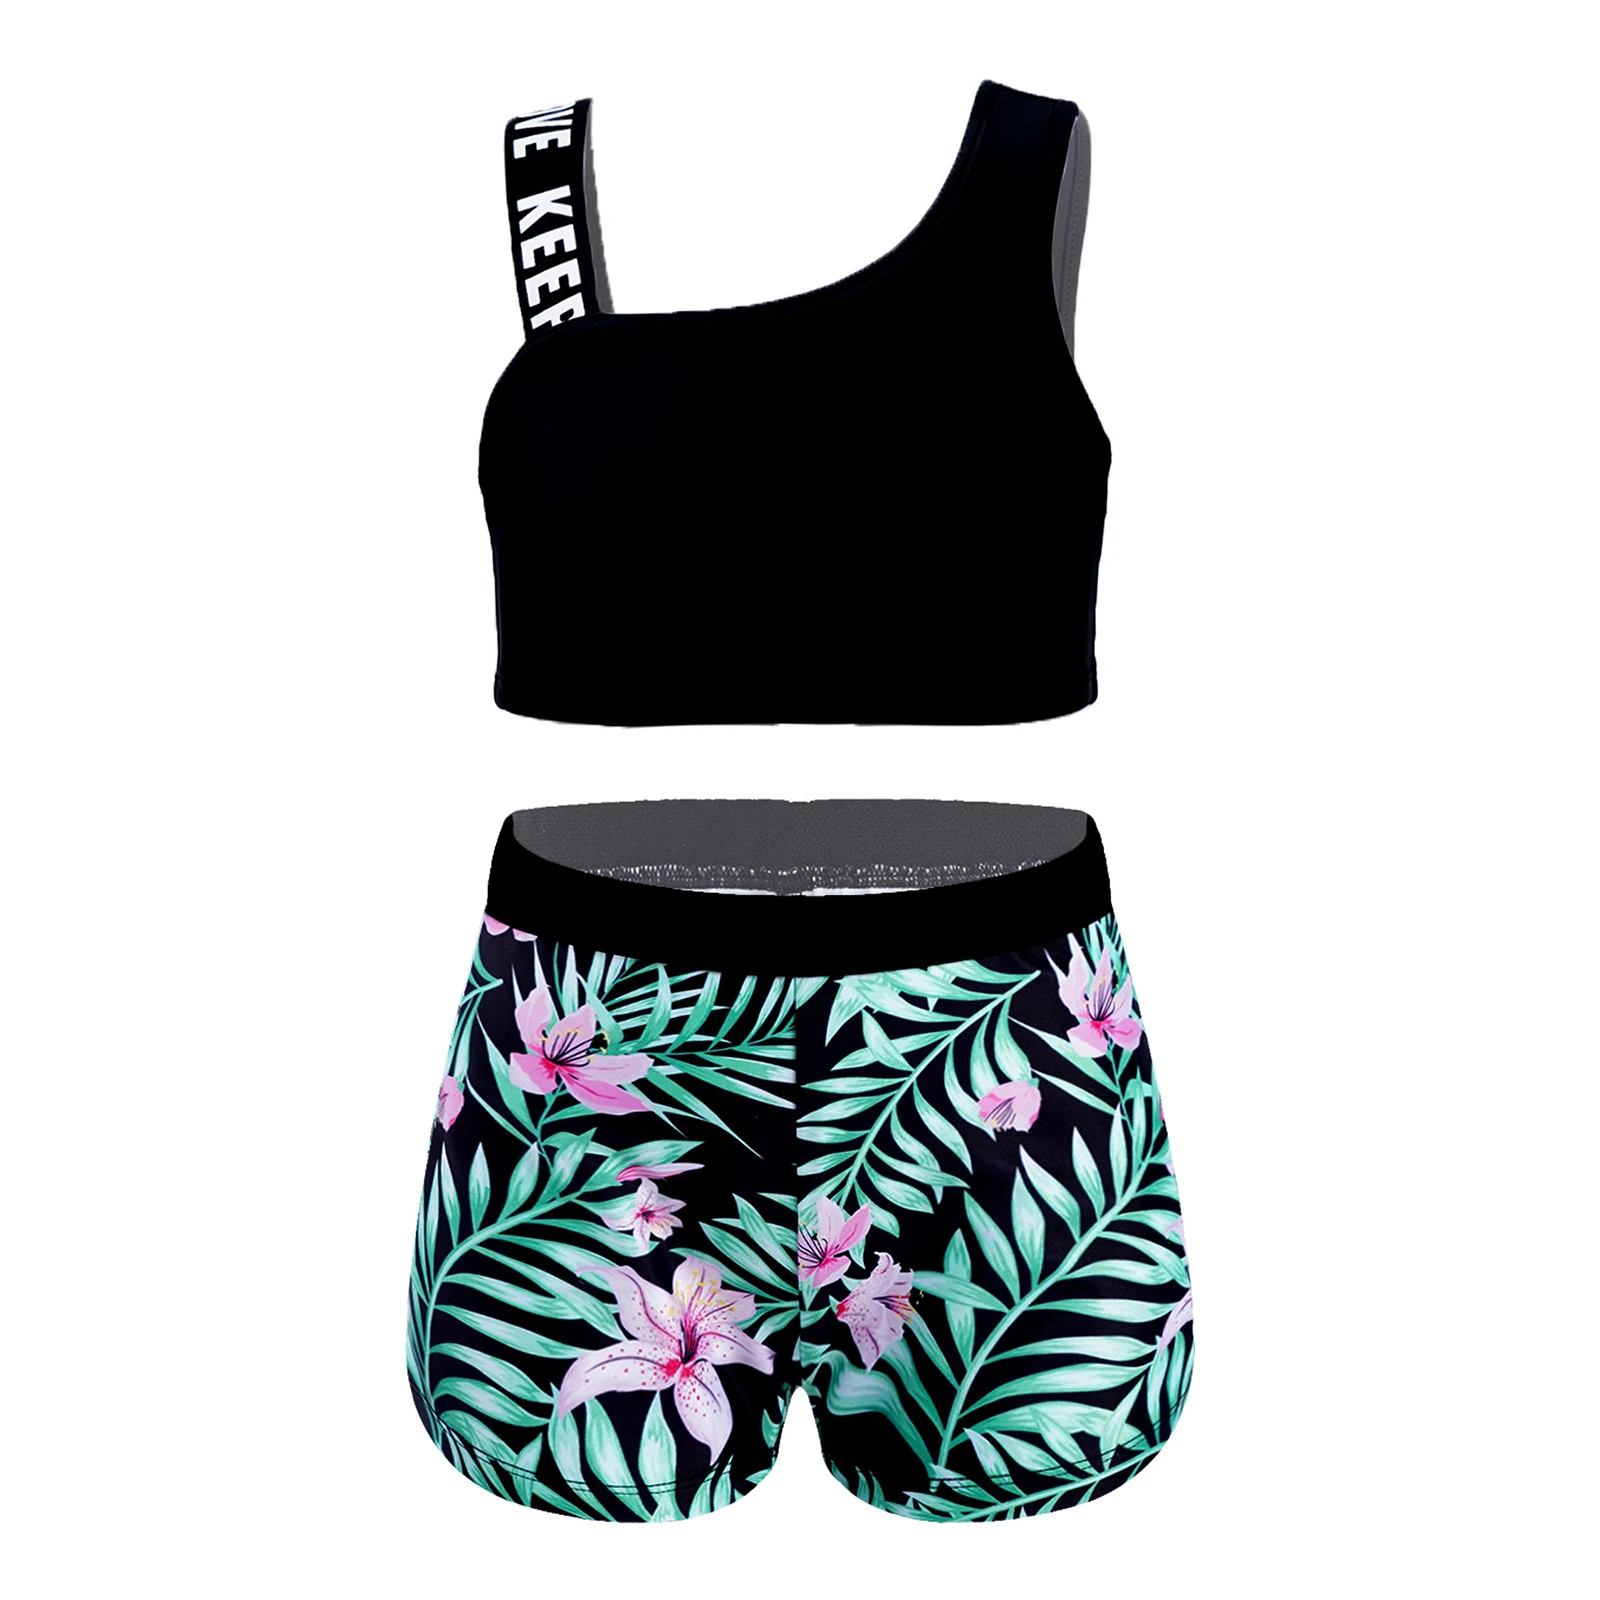 Kids Girls Athletic Outfit Crop Top Booty Shorts Bottoms Gymnastics ...